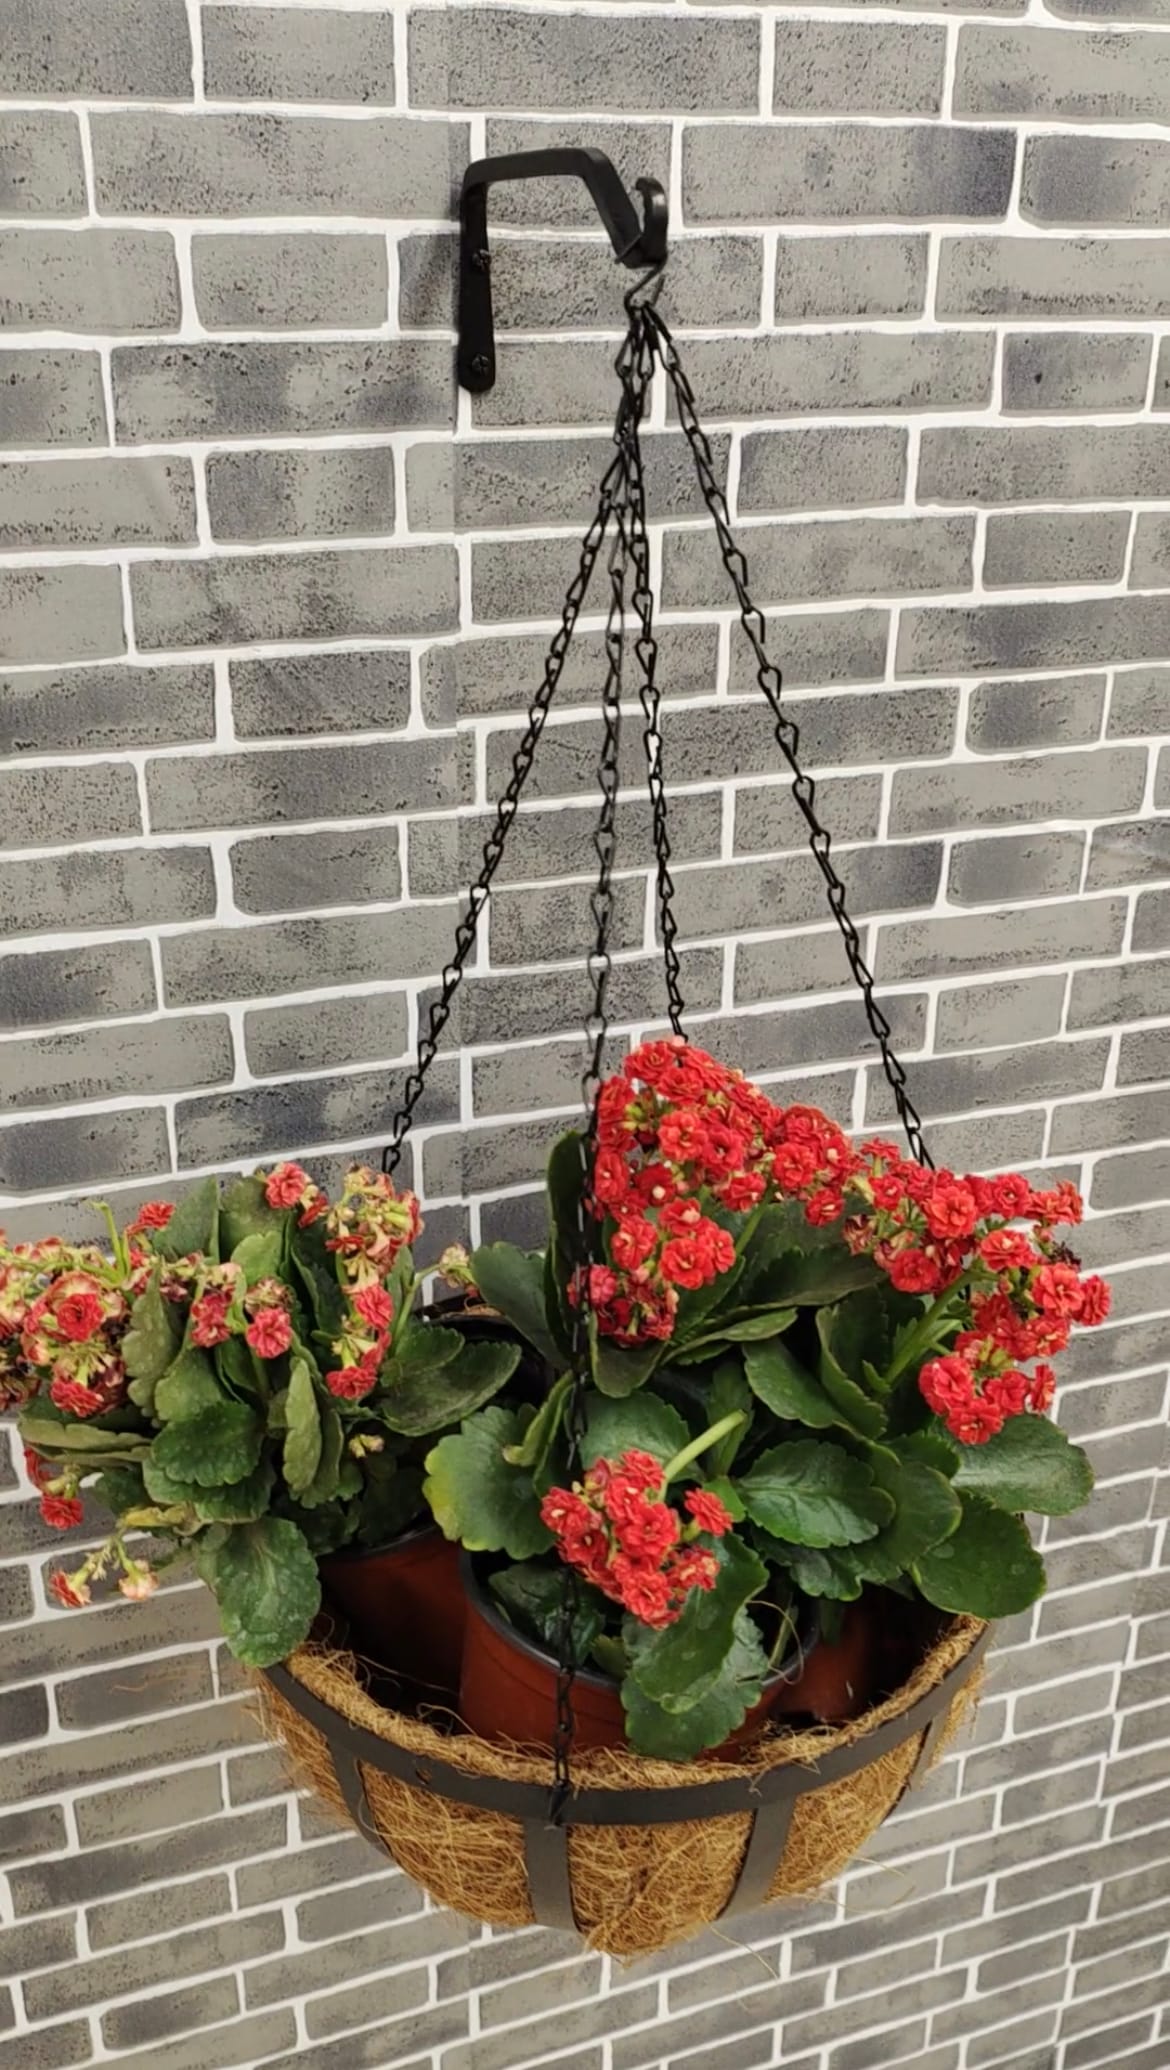  ST4U Hanging Basket Chains 4 Point Heavy Duty Black Metal Chain  Hangers with 4 Clip Hook for Hanging Plants Flowers Baskets Pot 15.75 inch  : Patio, Lawn & Garden